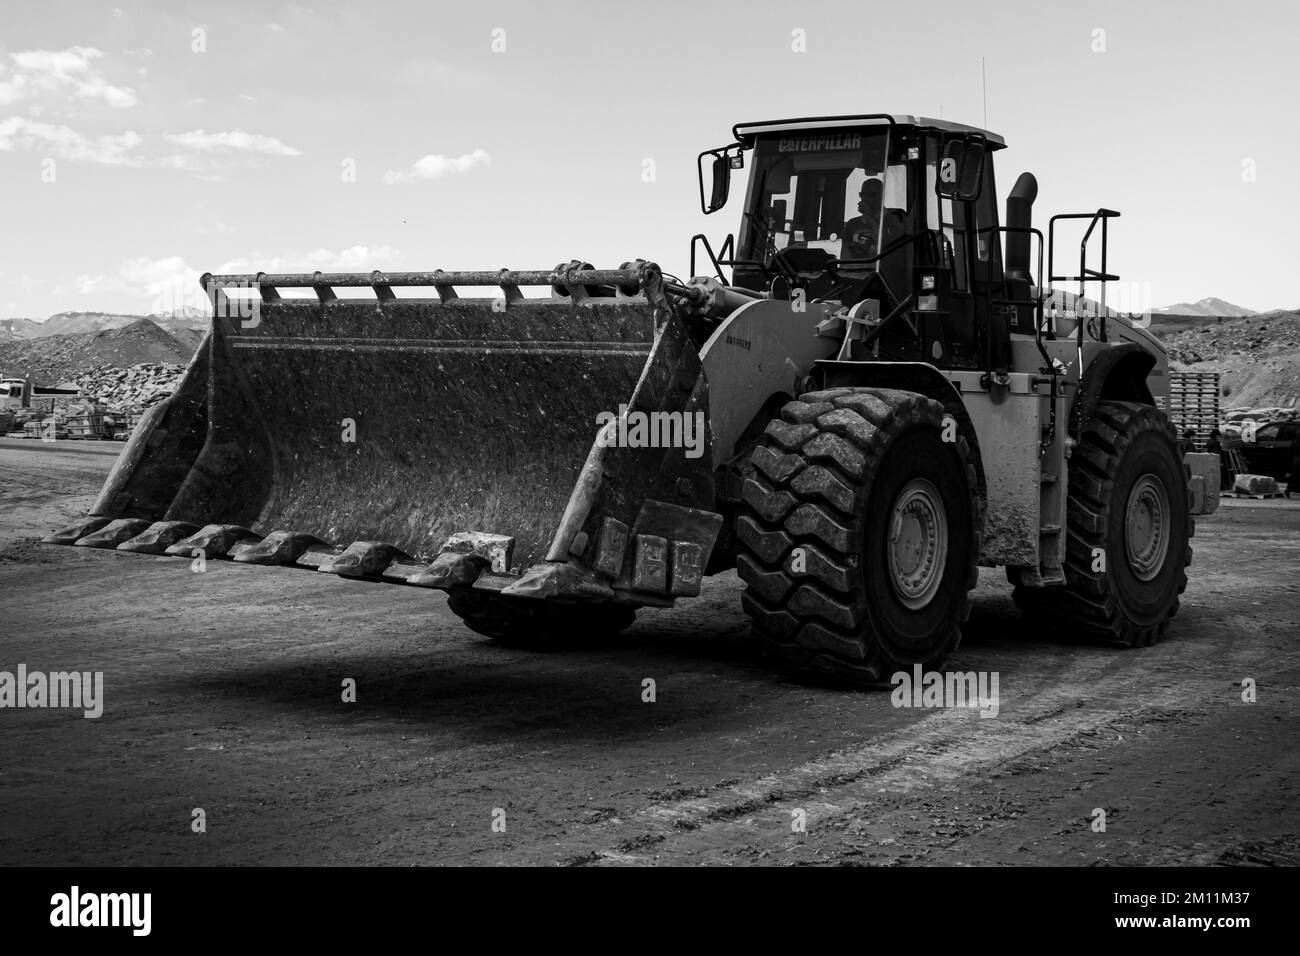 Wheel Loader on a Construction Site in Utah. Black and white photo. Stock Photo